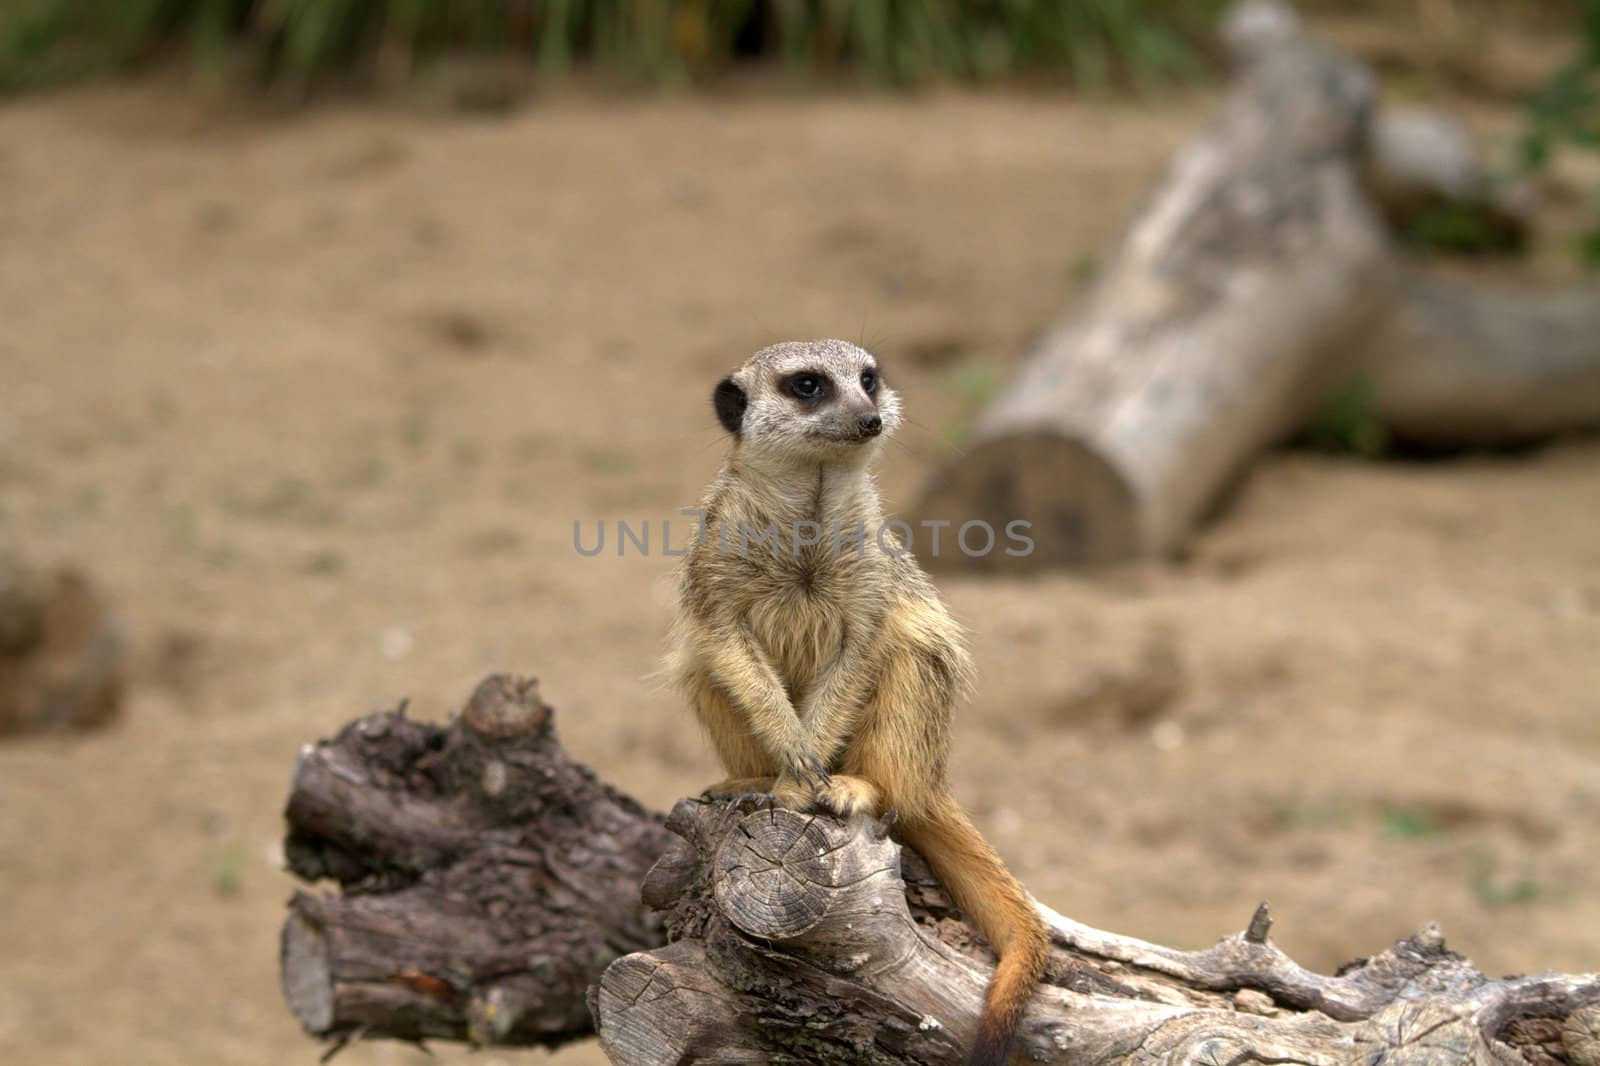 A single meerkat (suricate) standing in a zoo. The meerkat or suricate, Suricata suricatta, is a small mammal belonging to the mongoose family. Meerkats live in all parts of the Kalahari Desert in Botswana, in much of the Namib Desert in Namibia